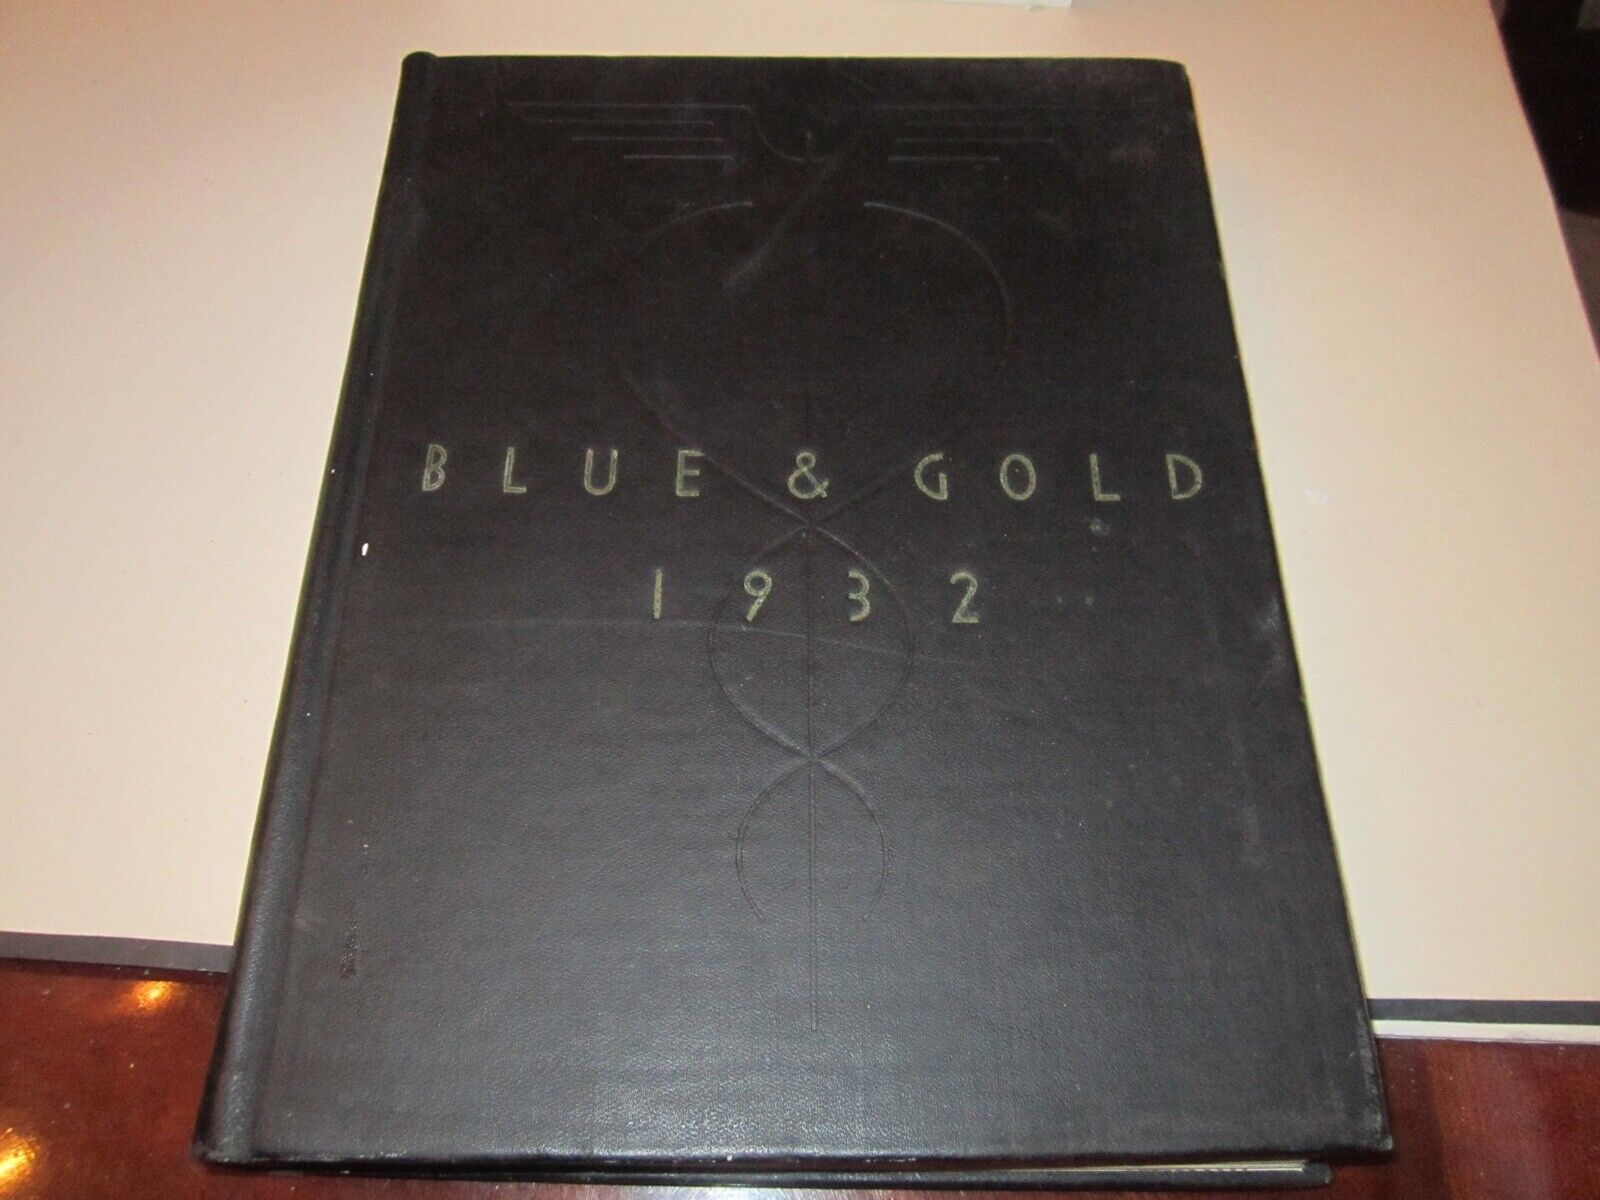 1932 THE UNIVERSITY OF CALIFORNIA YEAR BOOK - BLUE AND GOLD - VERY HEAVY